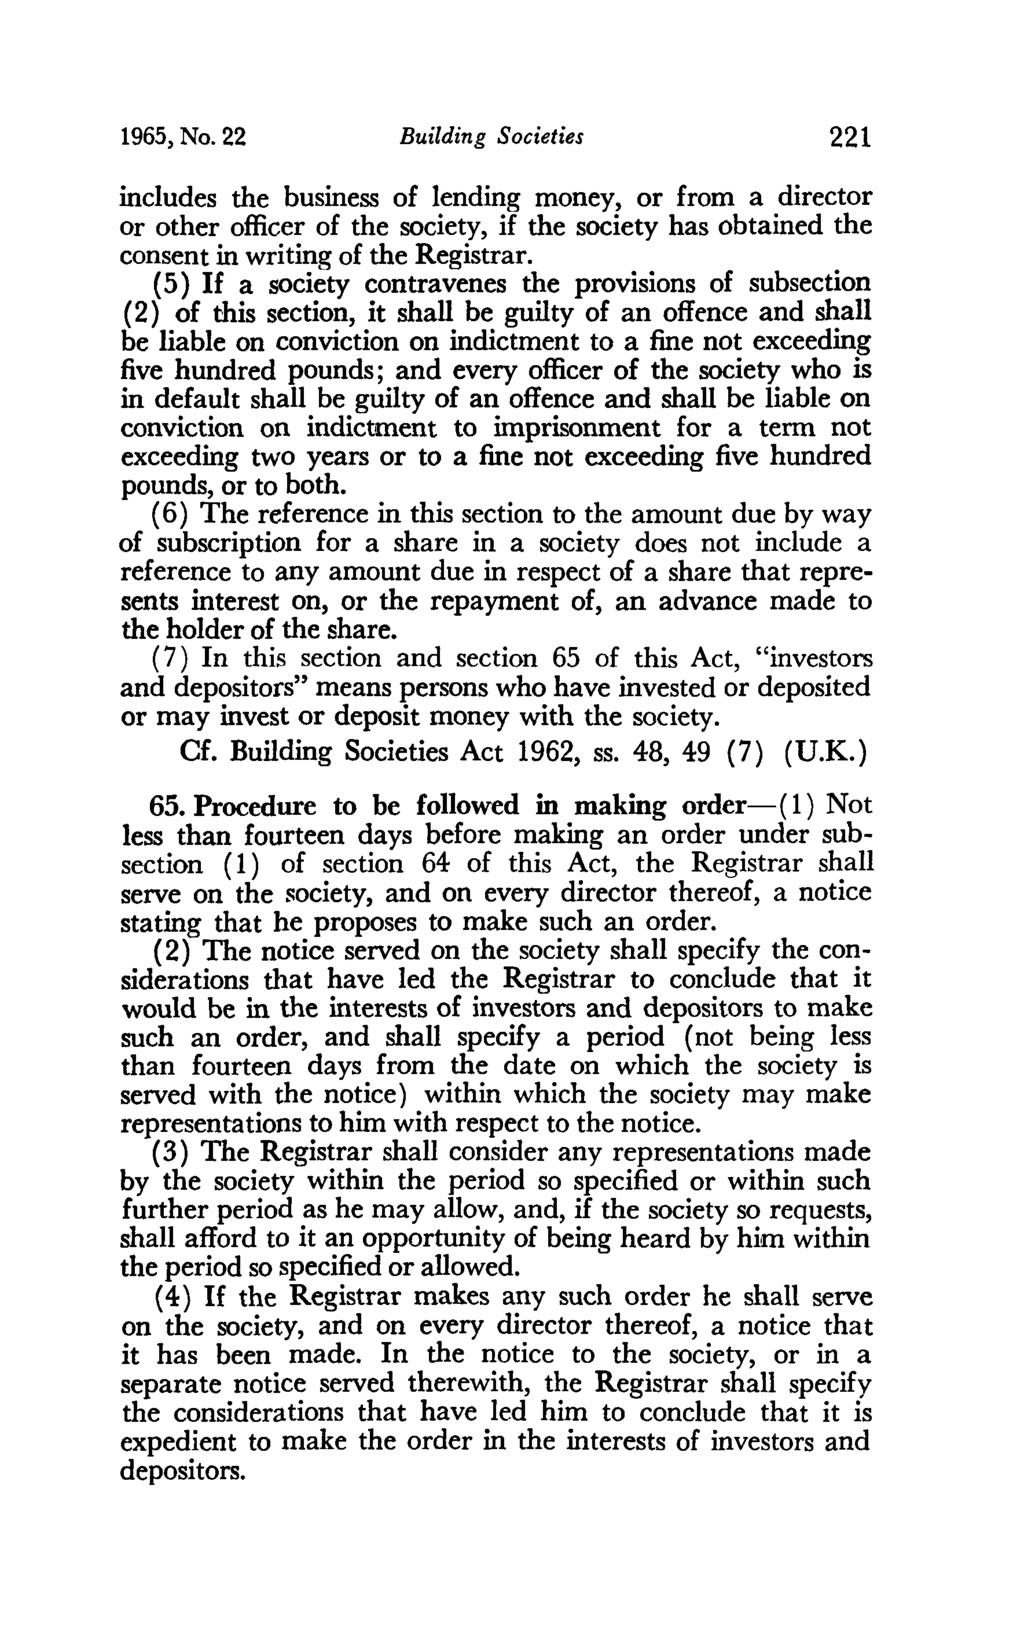 1965) No. 22 Building Societies 221 includes the business of lending money, or from a director or other officer of the society, if the society has obtained the consent in writing of the Registrar.